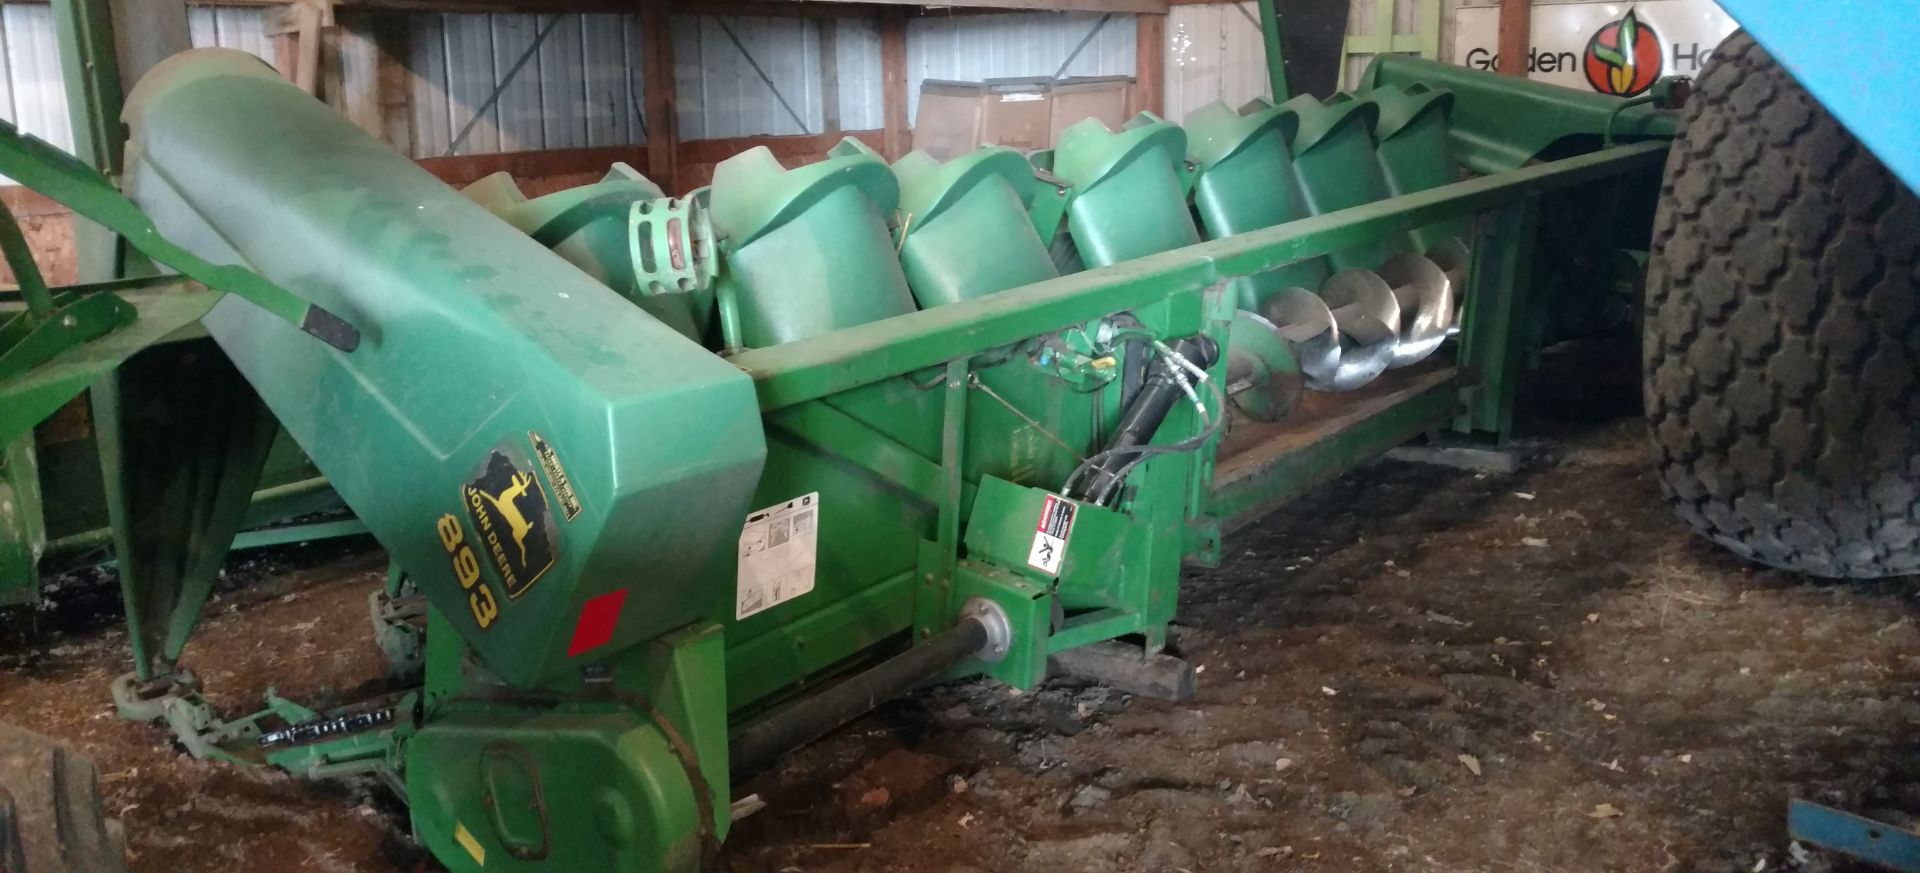 JD 893 plastic corn head, single point, PTO shafts, hyd. deck plates, new gathering chains, knife